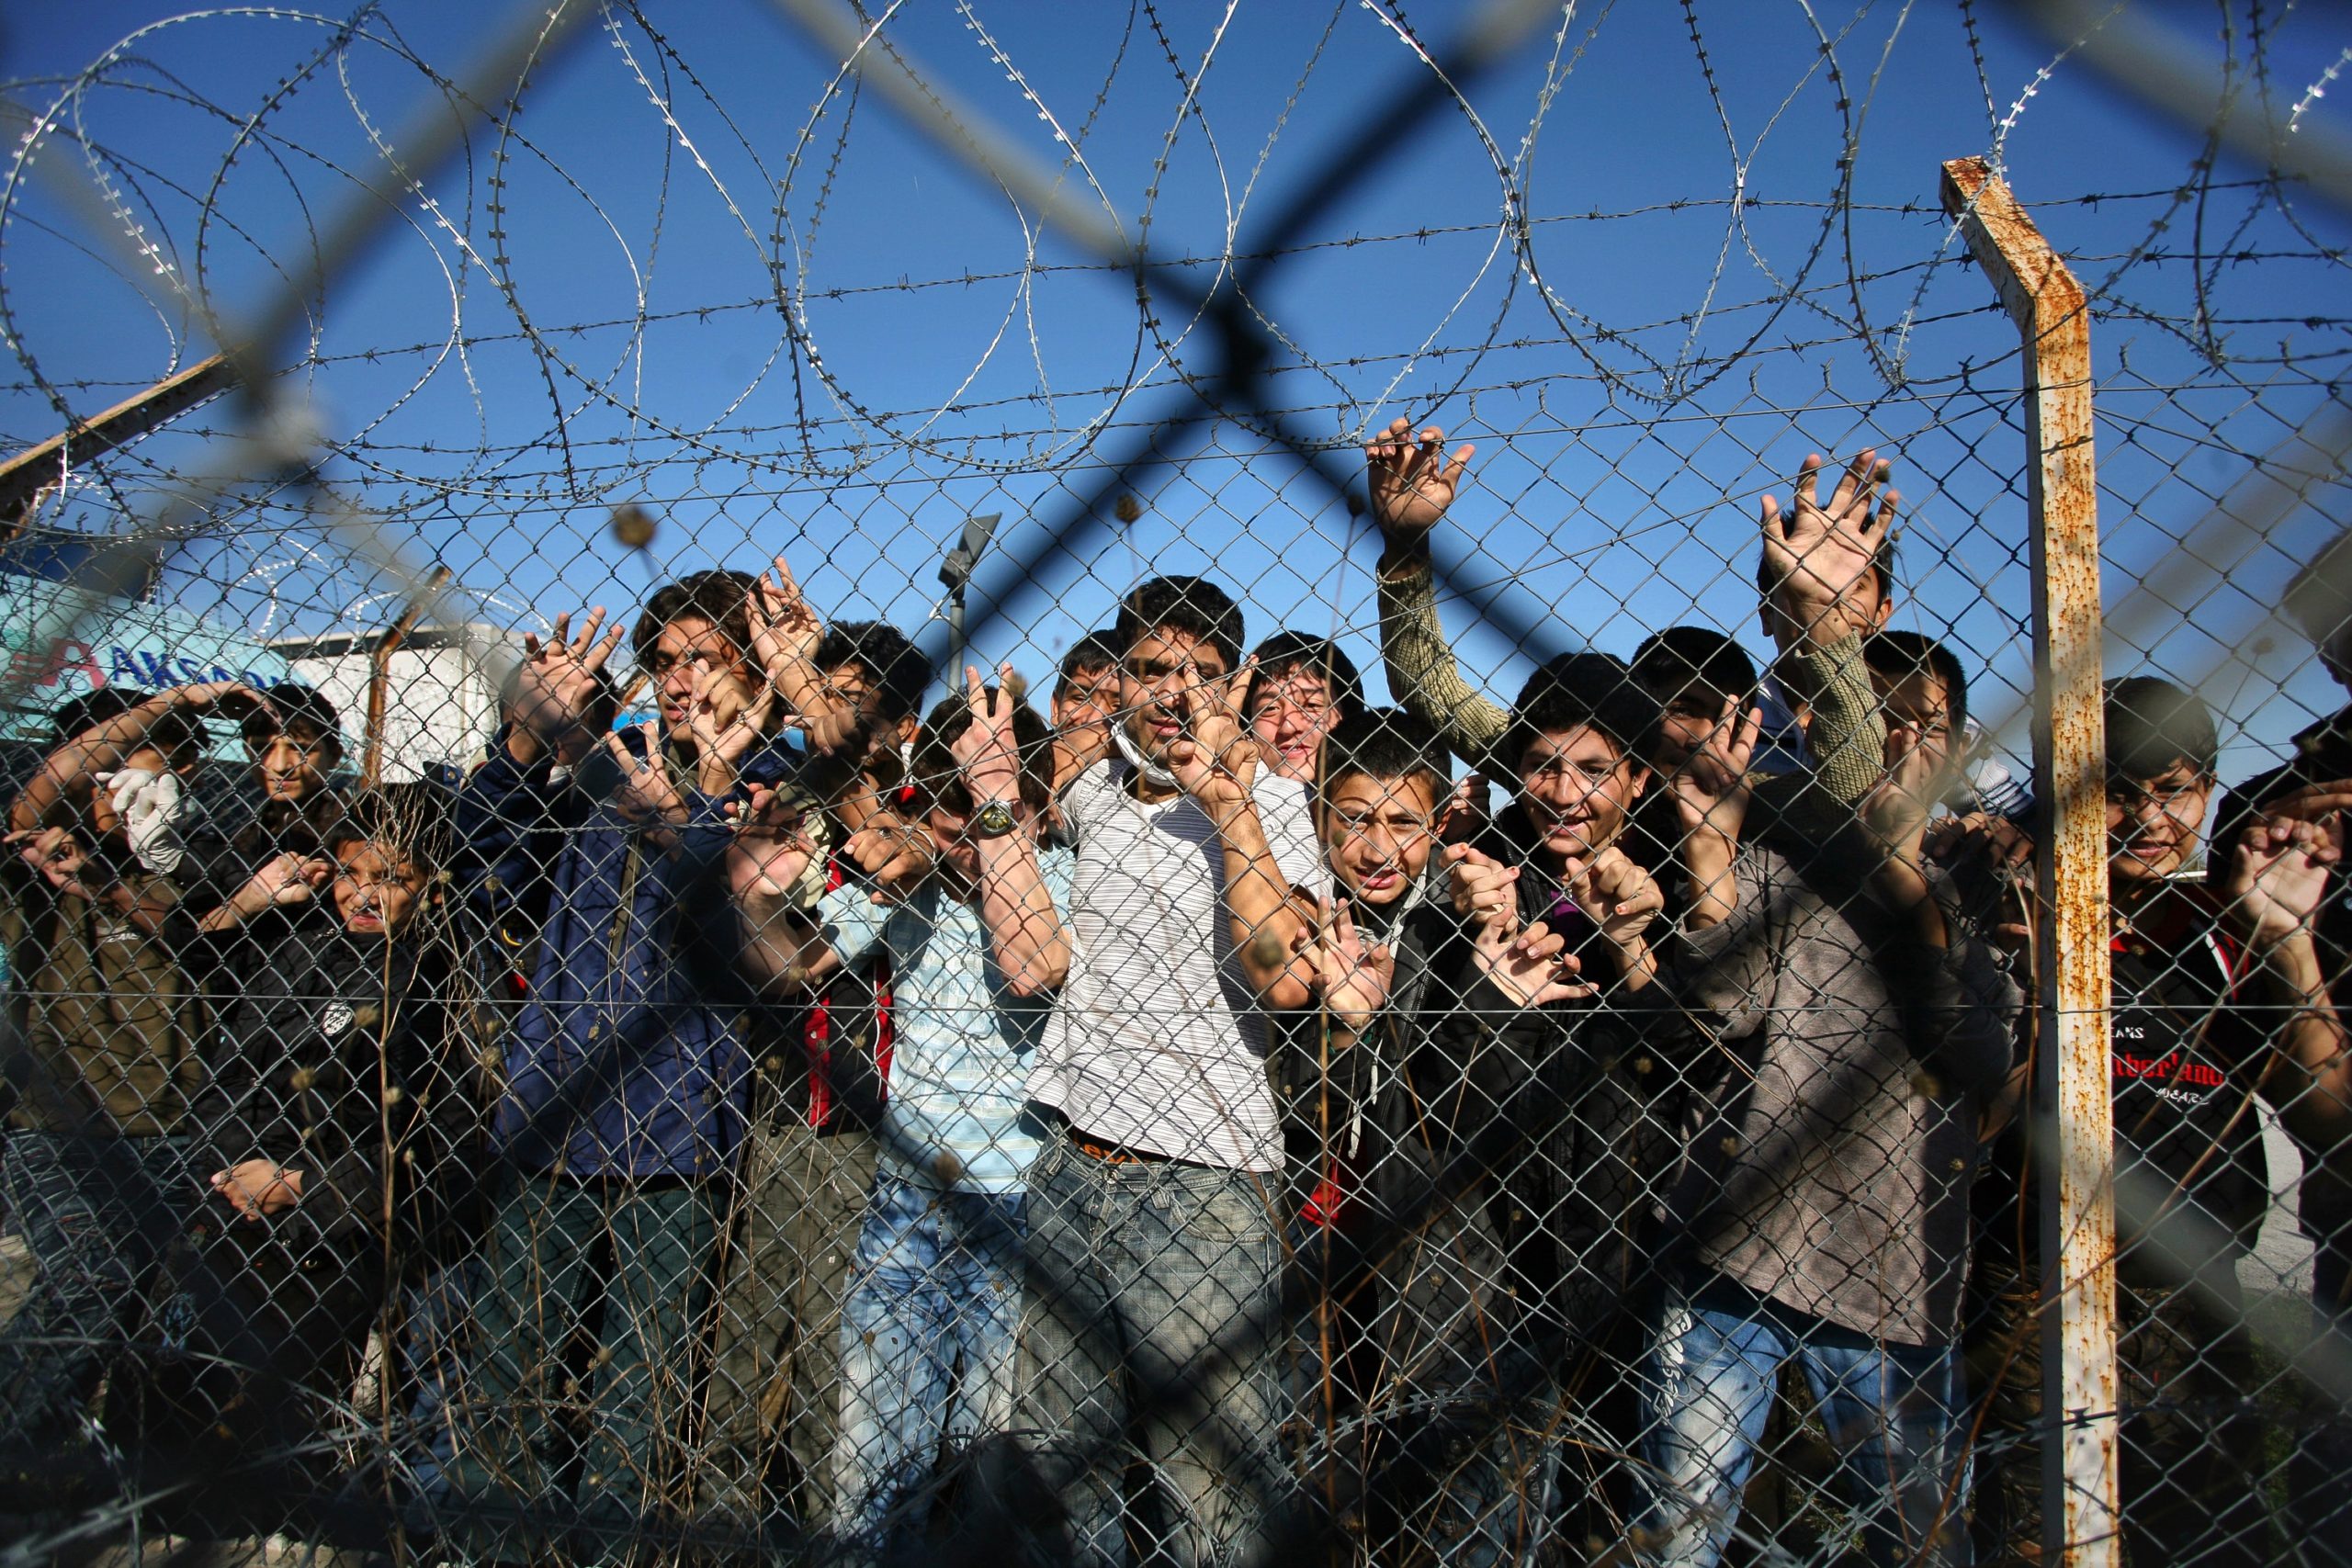 Immigrant minors peer out through the fence of an immigrant detention center in the village of Filakio, on the Greek-Turkish border, upon the arrival there of the Frontex Rapid Border Intervention Teams (RABITs) and EU officials on November 5, 2010. Border guards from 26 nations began arriving on November 2 in northeastern Greece to help curb a wave of illegal immigrants crossing over from Turkey, European border agency Frontex said. Coordinated by Greek police, some 170 guards will be on hand and until the end of December to monitor borders and scout for illegal immigrants, Frontex spokesman Michal Parzyszek said. AFP PHOTO /Sakis Mitrolidis (Photo credit should read SAKIS MITROLIDIS/AFP via Getty Images)